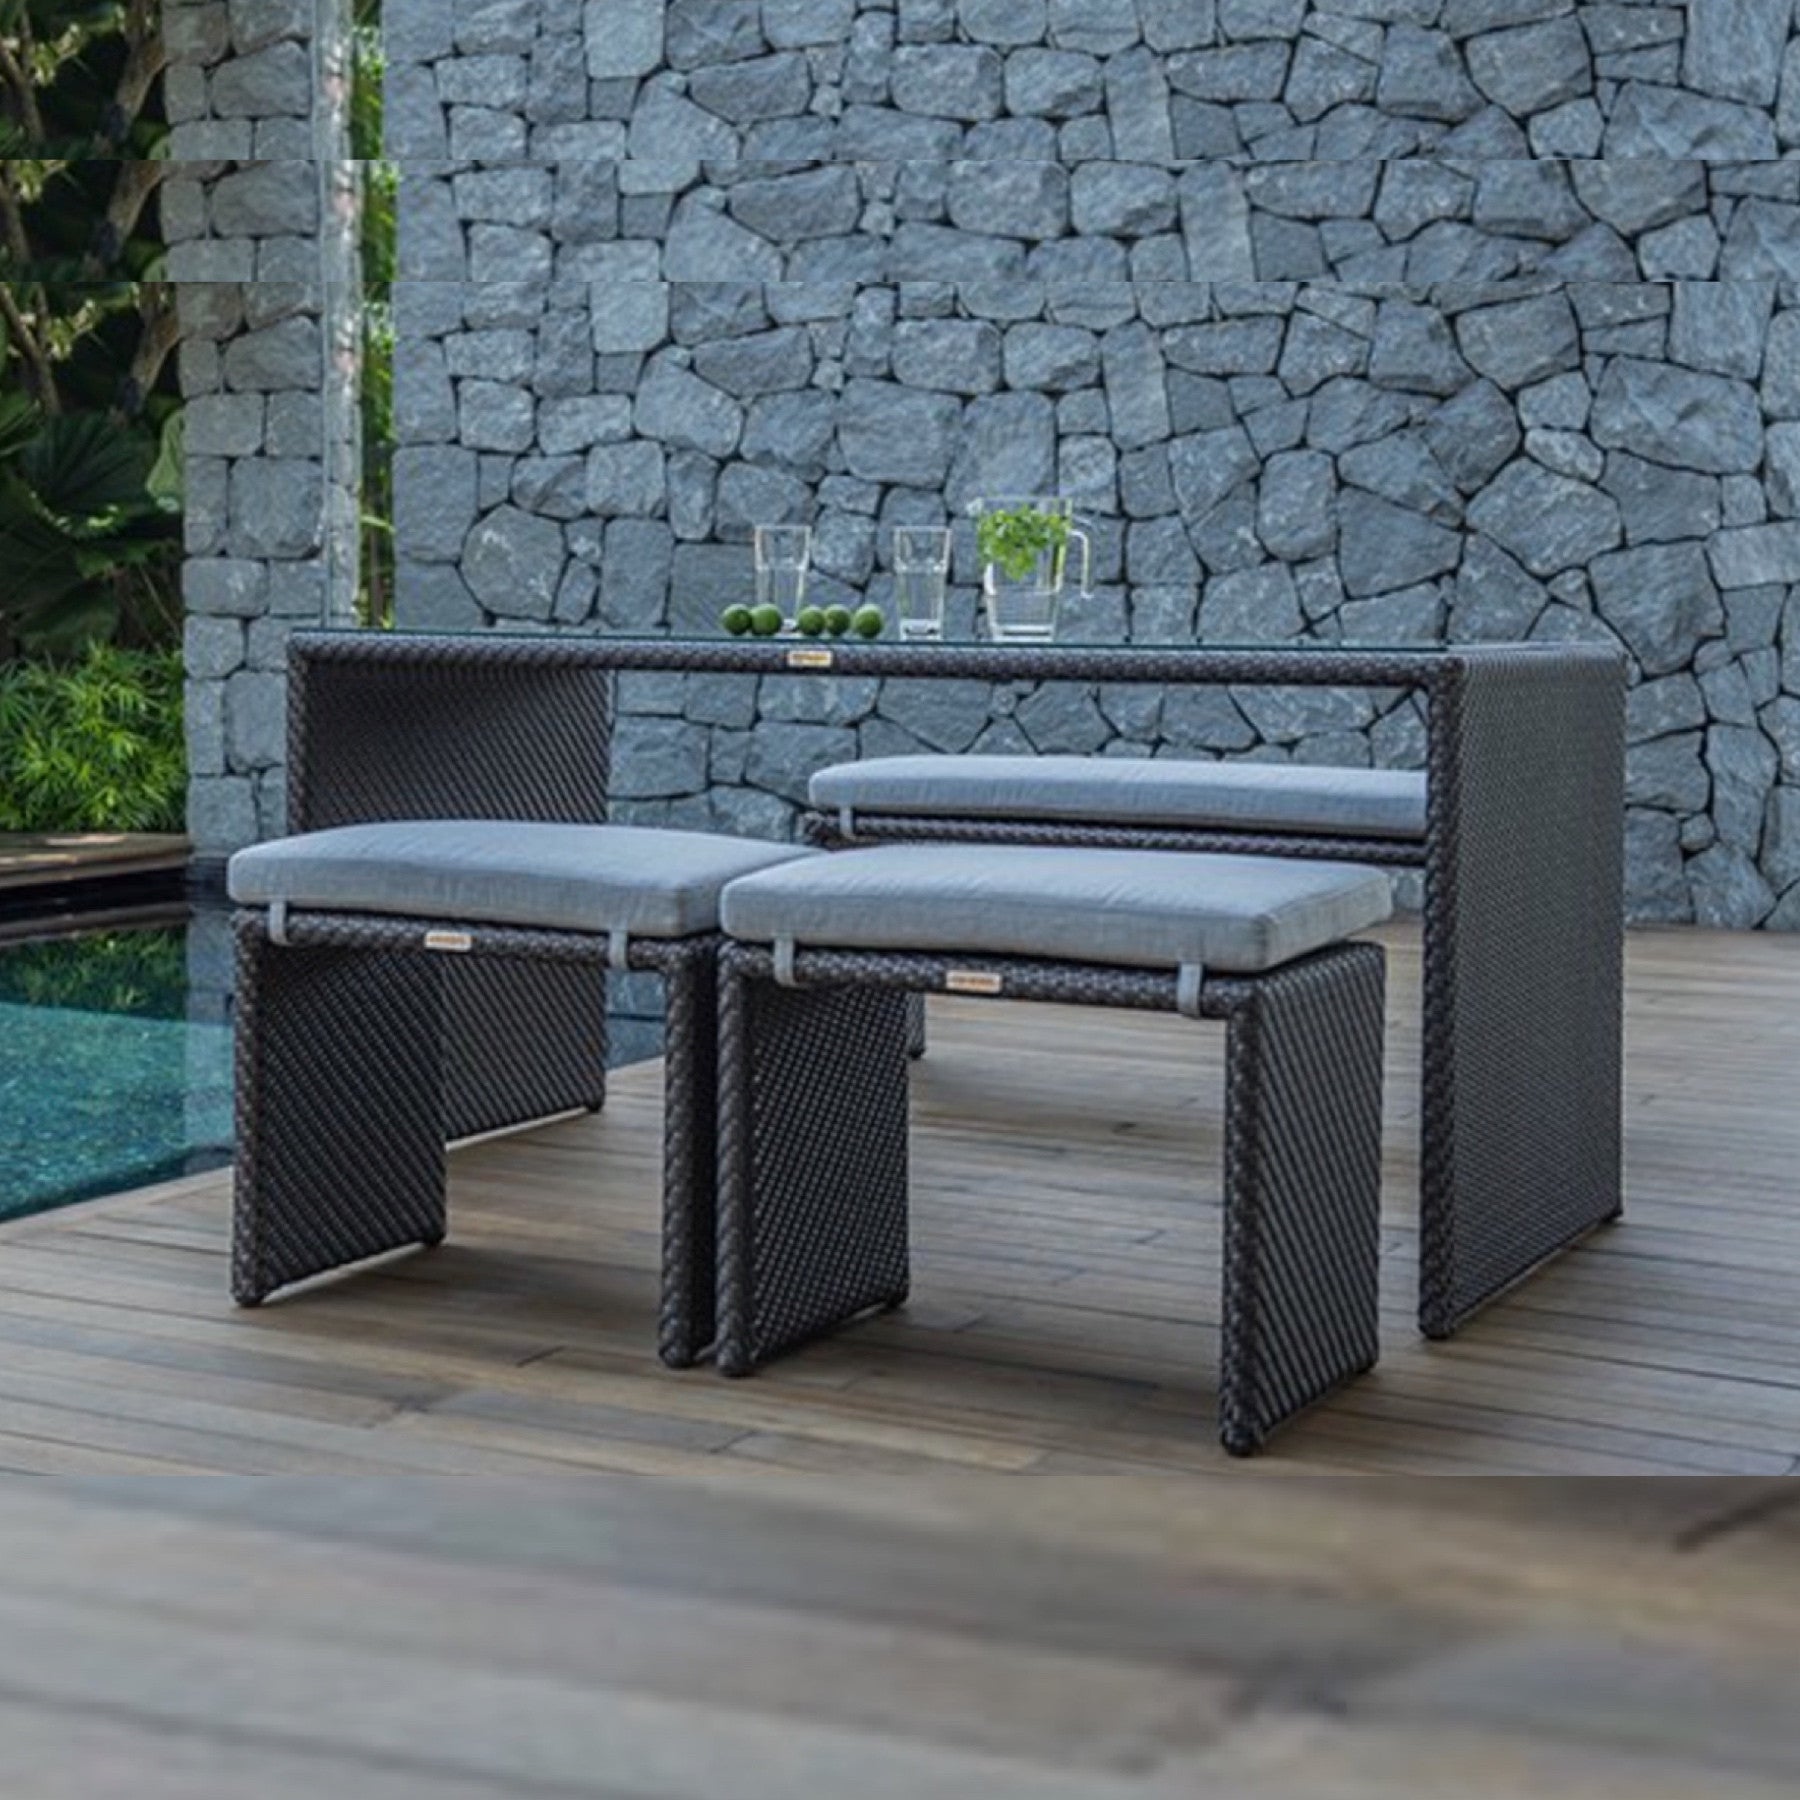 TRO27001 OHMM® Kyoto Outdoor Dining Collection